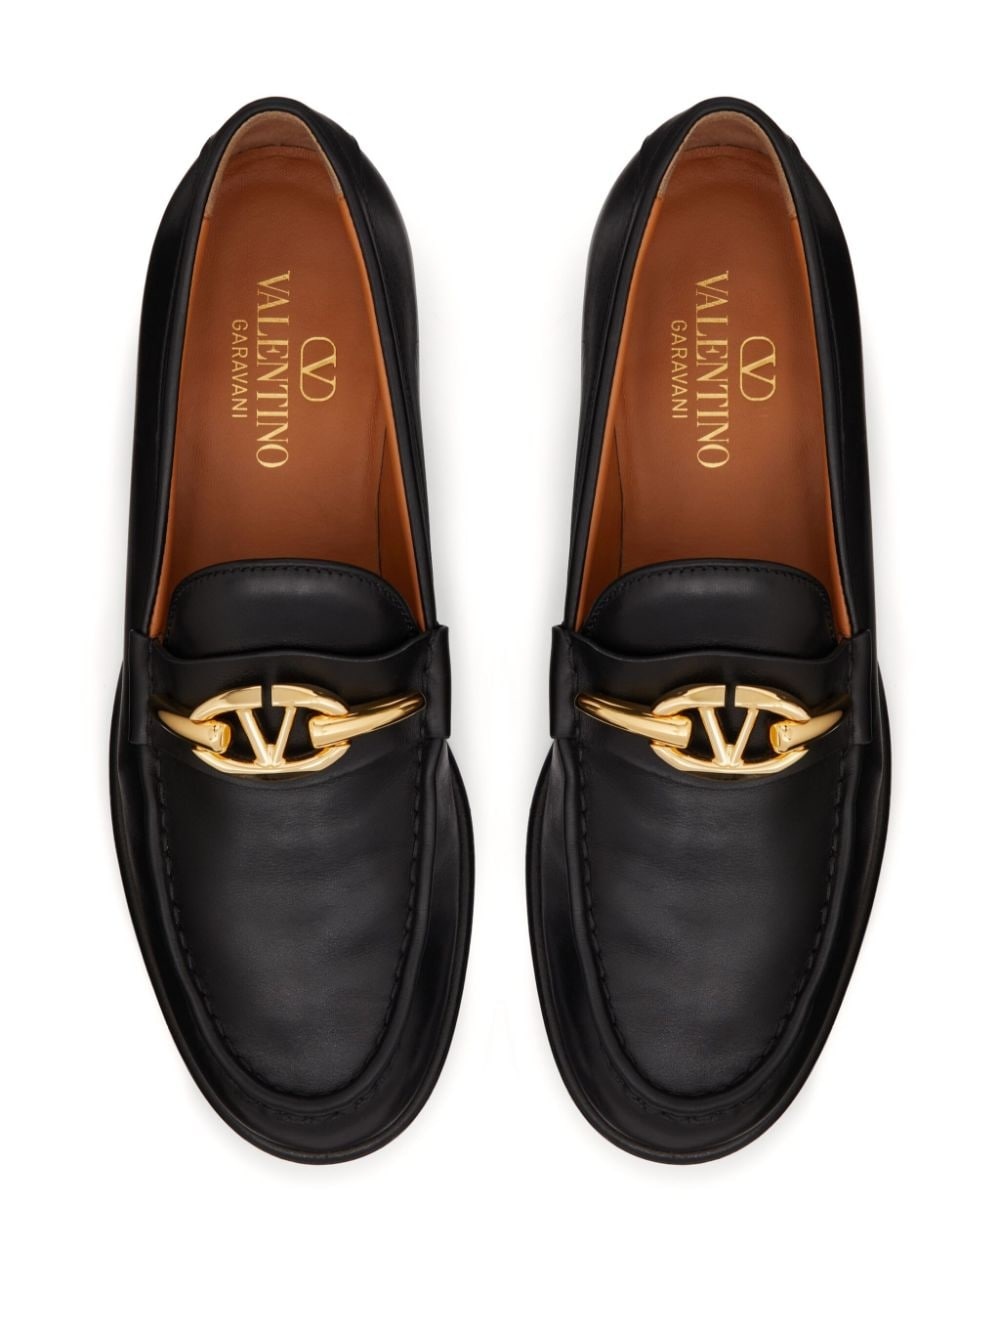 VLogo Moon leather loafers - 4